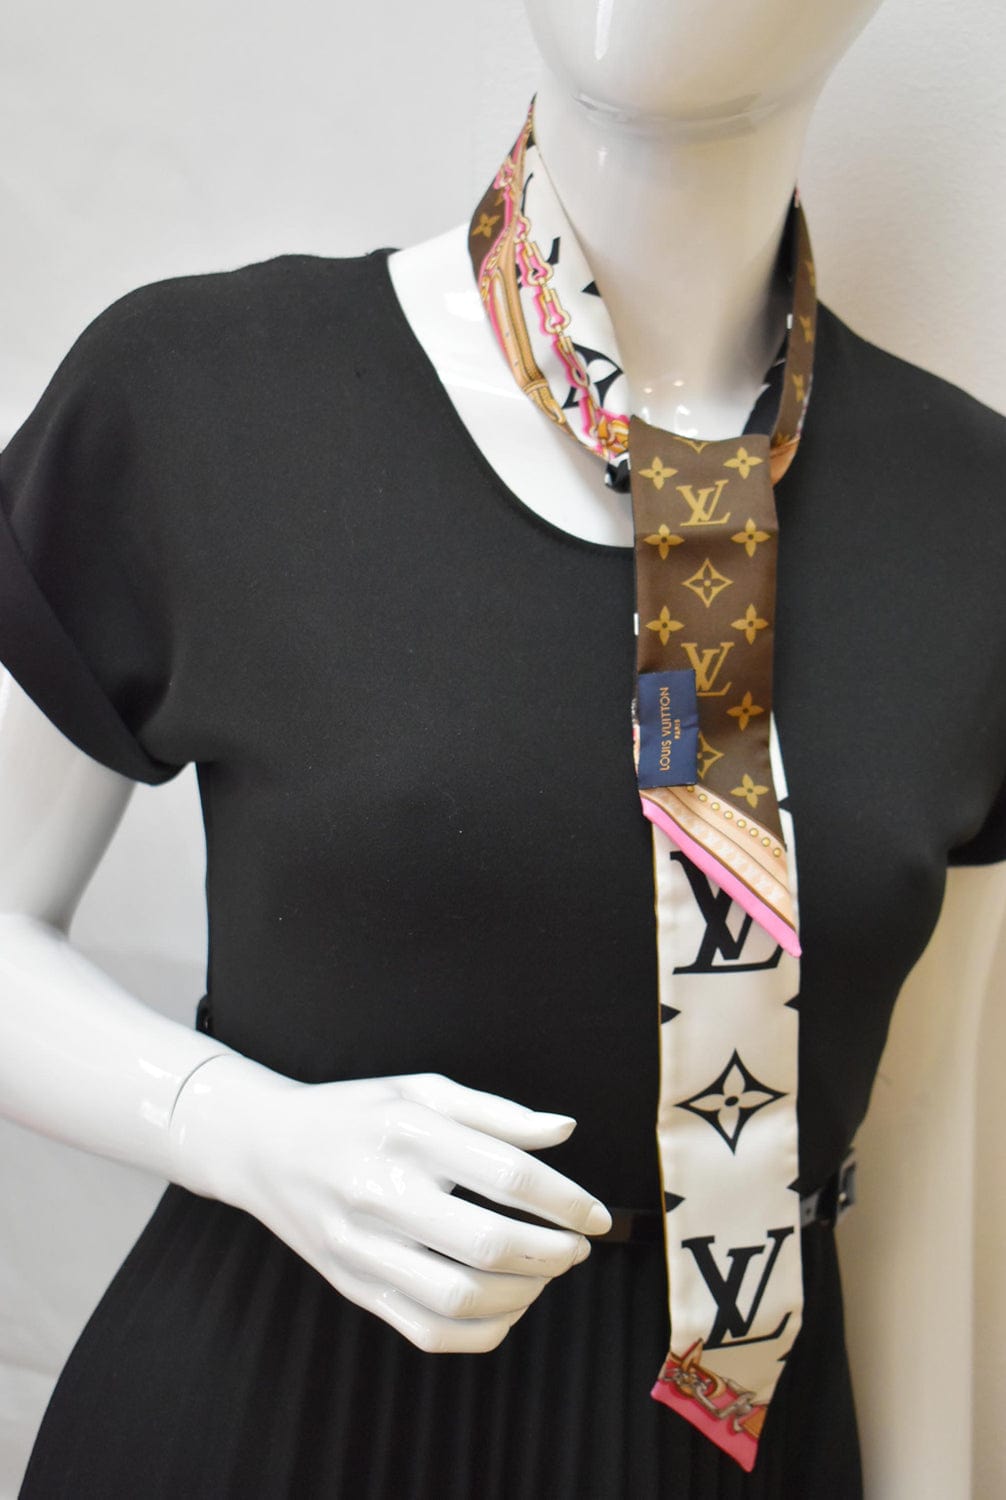 How To Wear Lv Silk Scarf With